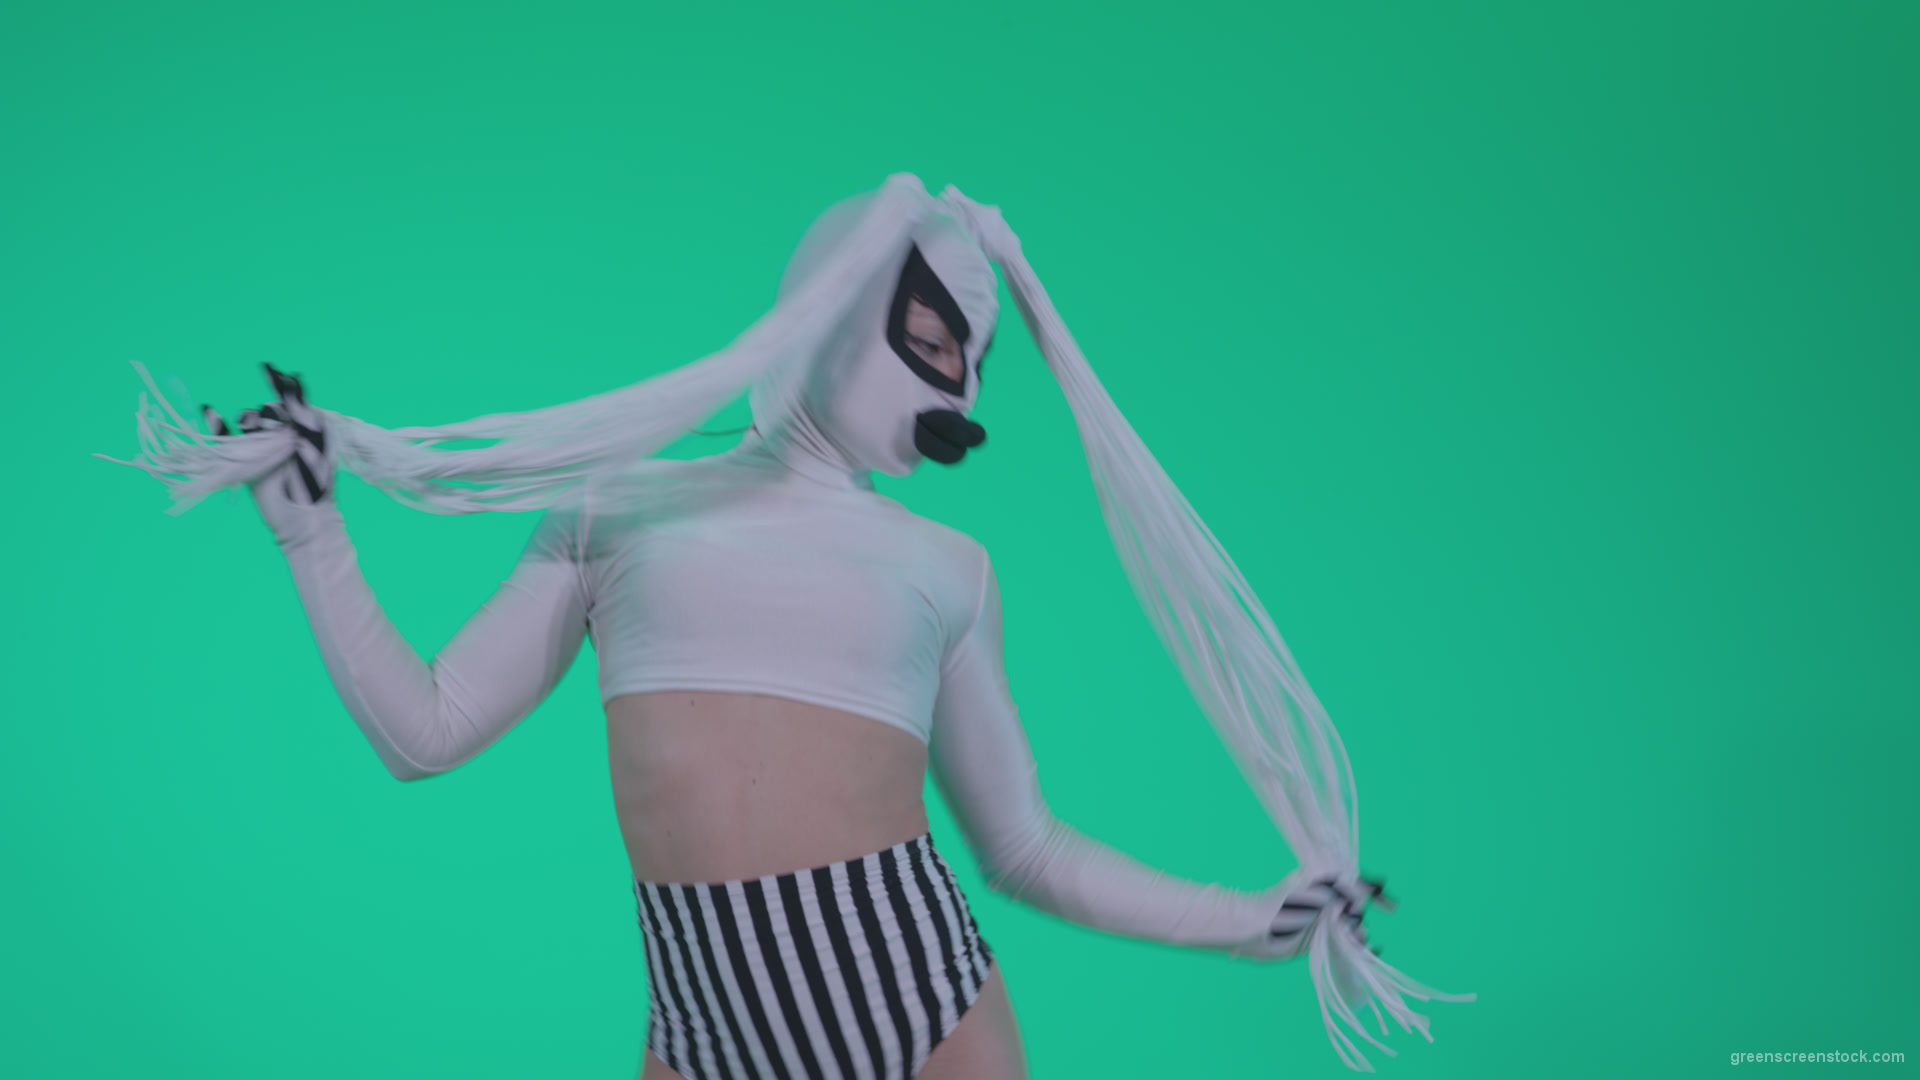 Go-go-Dancer-with-Latex-Top-t8-Green-Screen-Video-Footage_006 Green Screen Stock